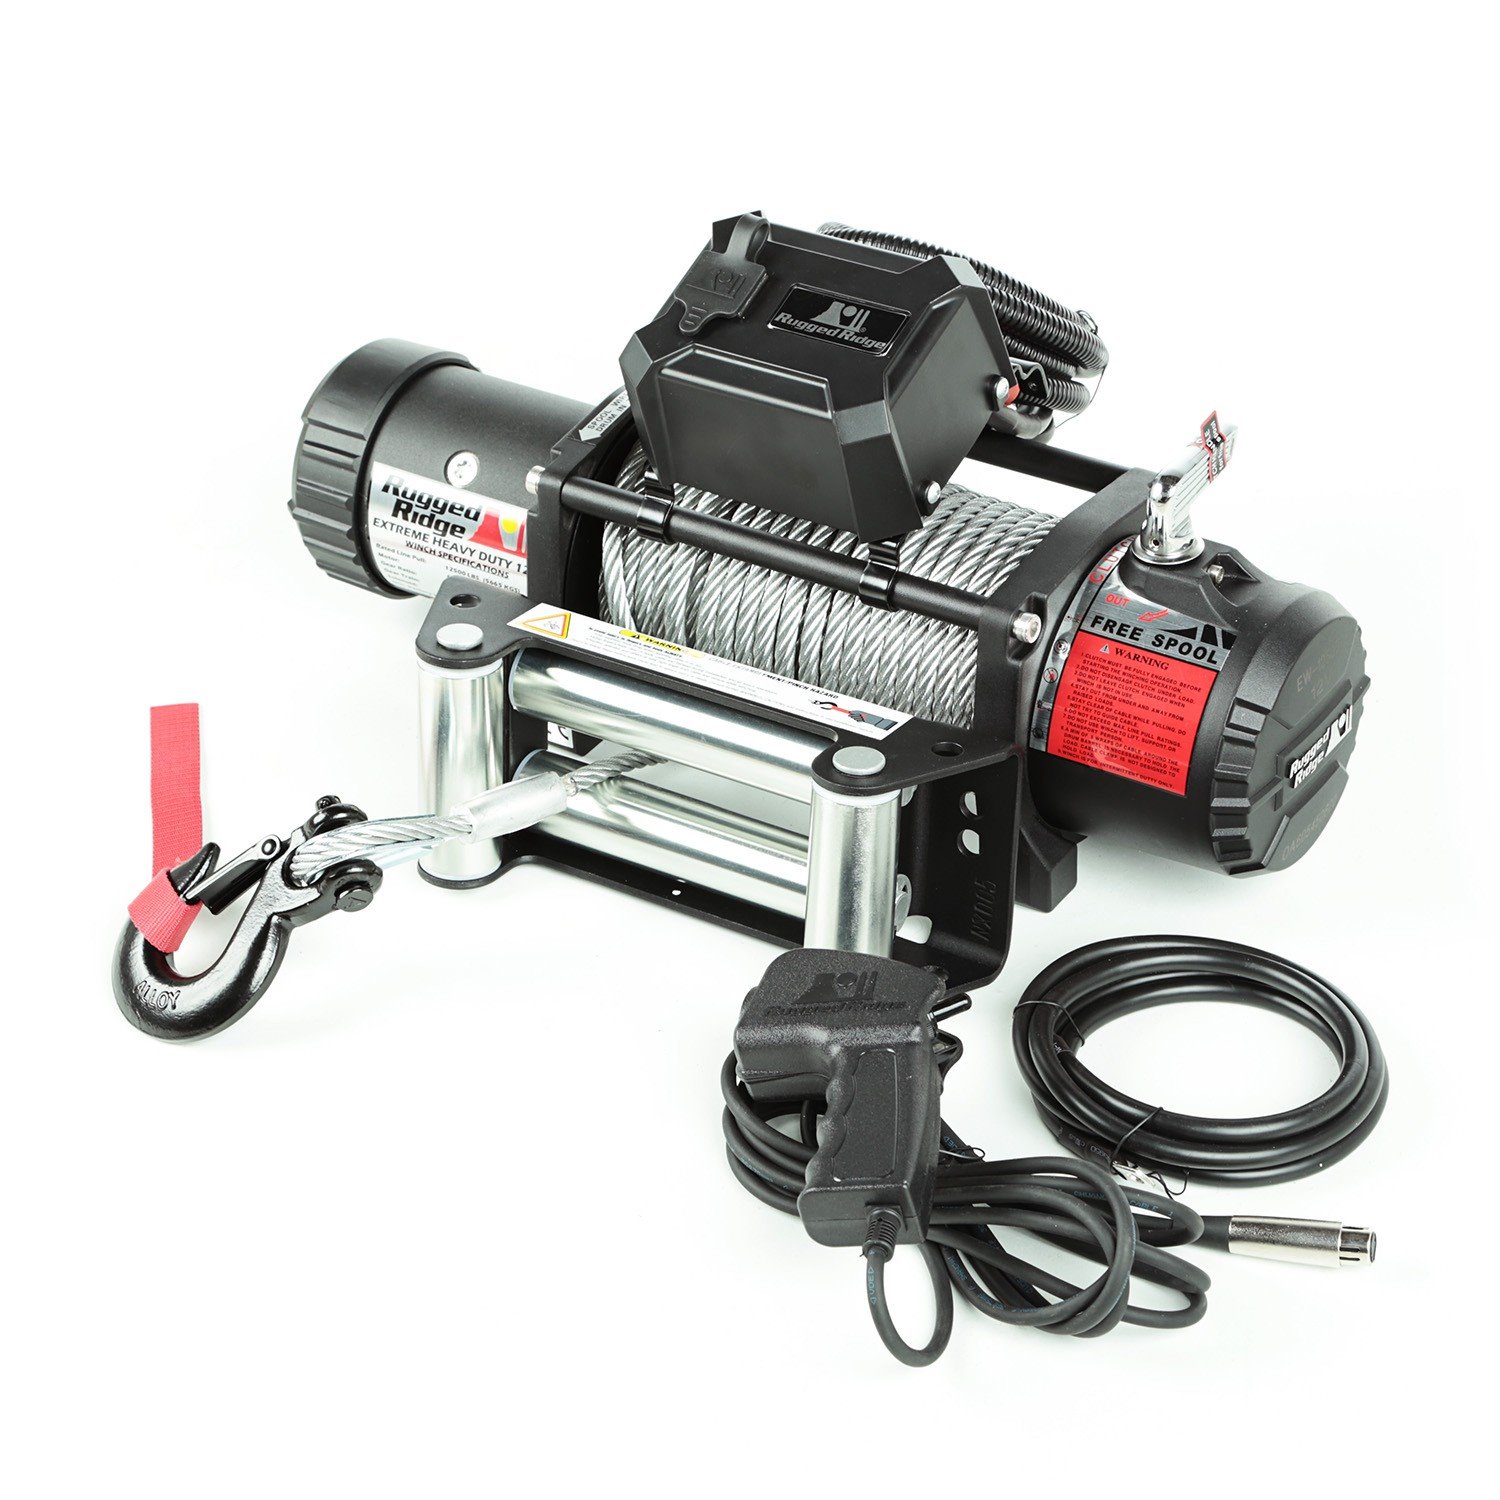 Heavy Duty Nautic 12,500 Lb. Rated Waterproof Winch with Cable